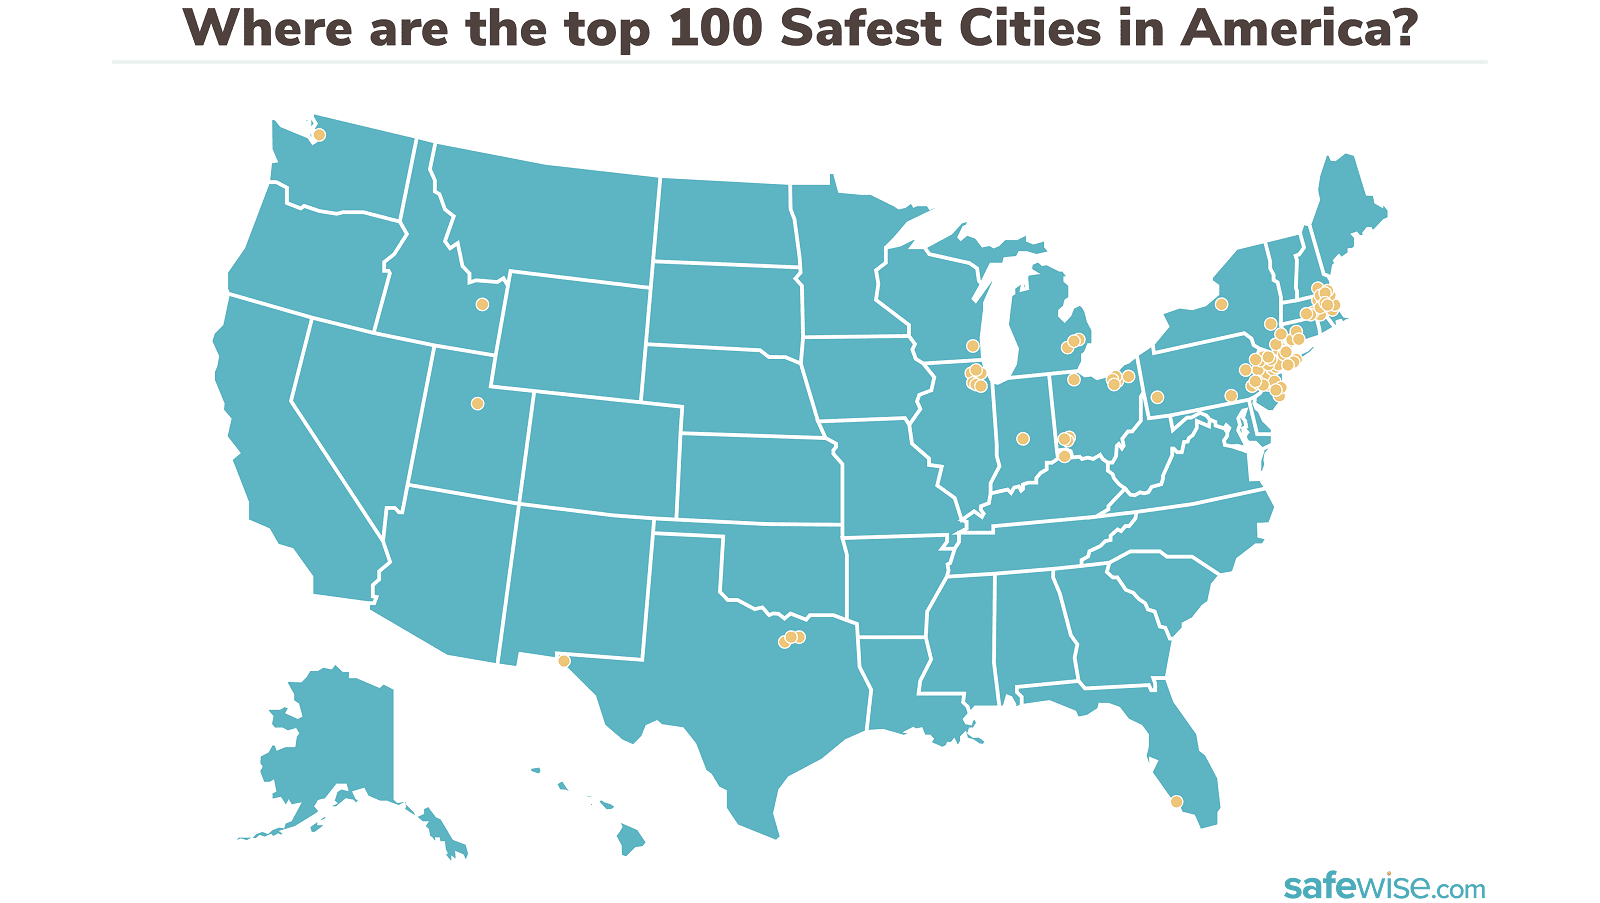 ‘Lowest crime rates in the country’: Dallas suburb Colleyville makes national safest city list_60f1c8daae72d.png